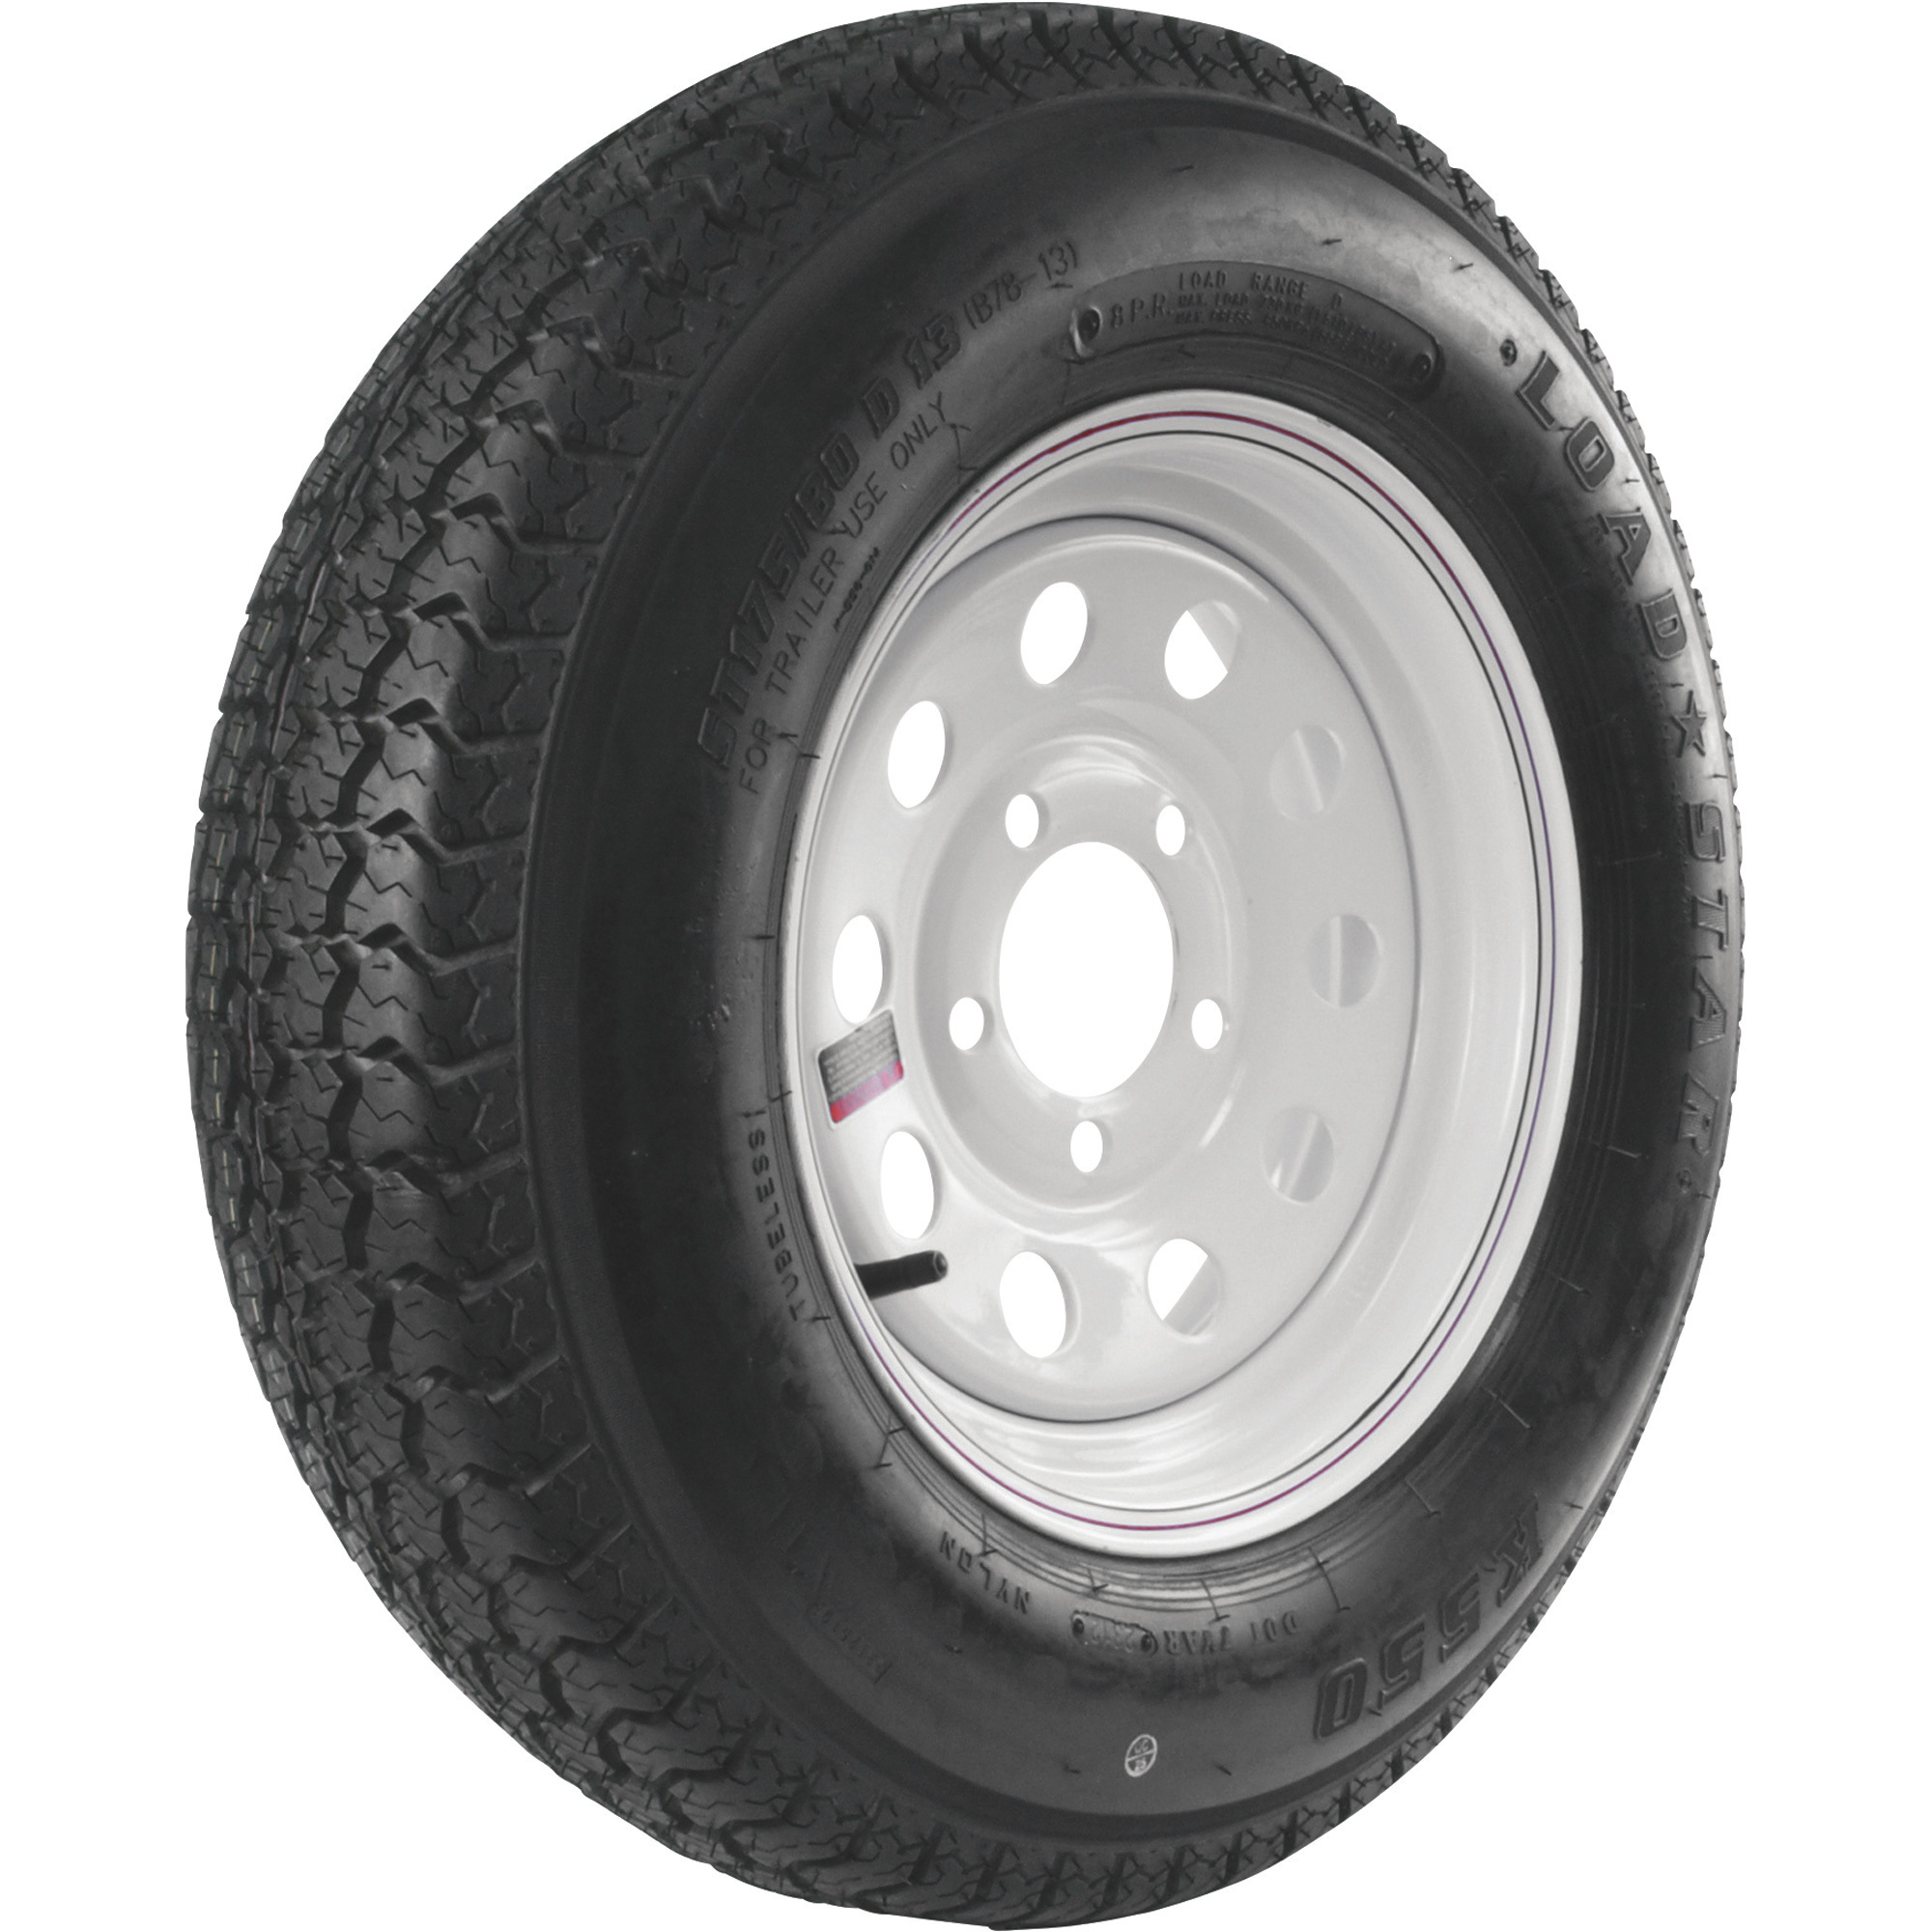 Kenda Loadstar 13in. Bias-Ply Trailer Tire and Wheel Assembly